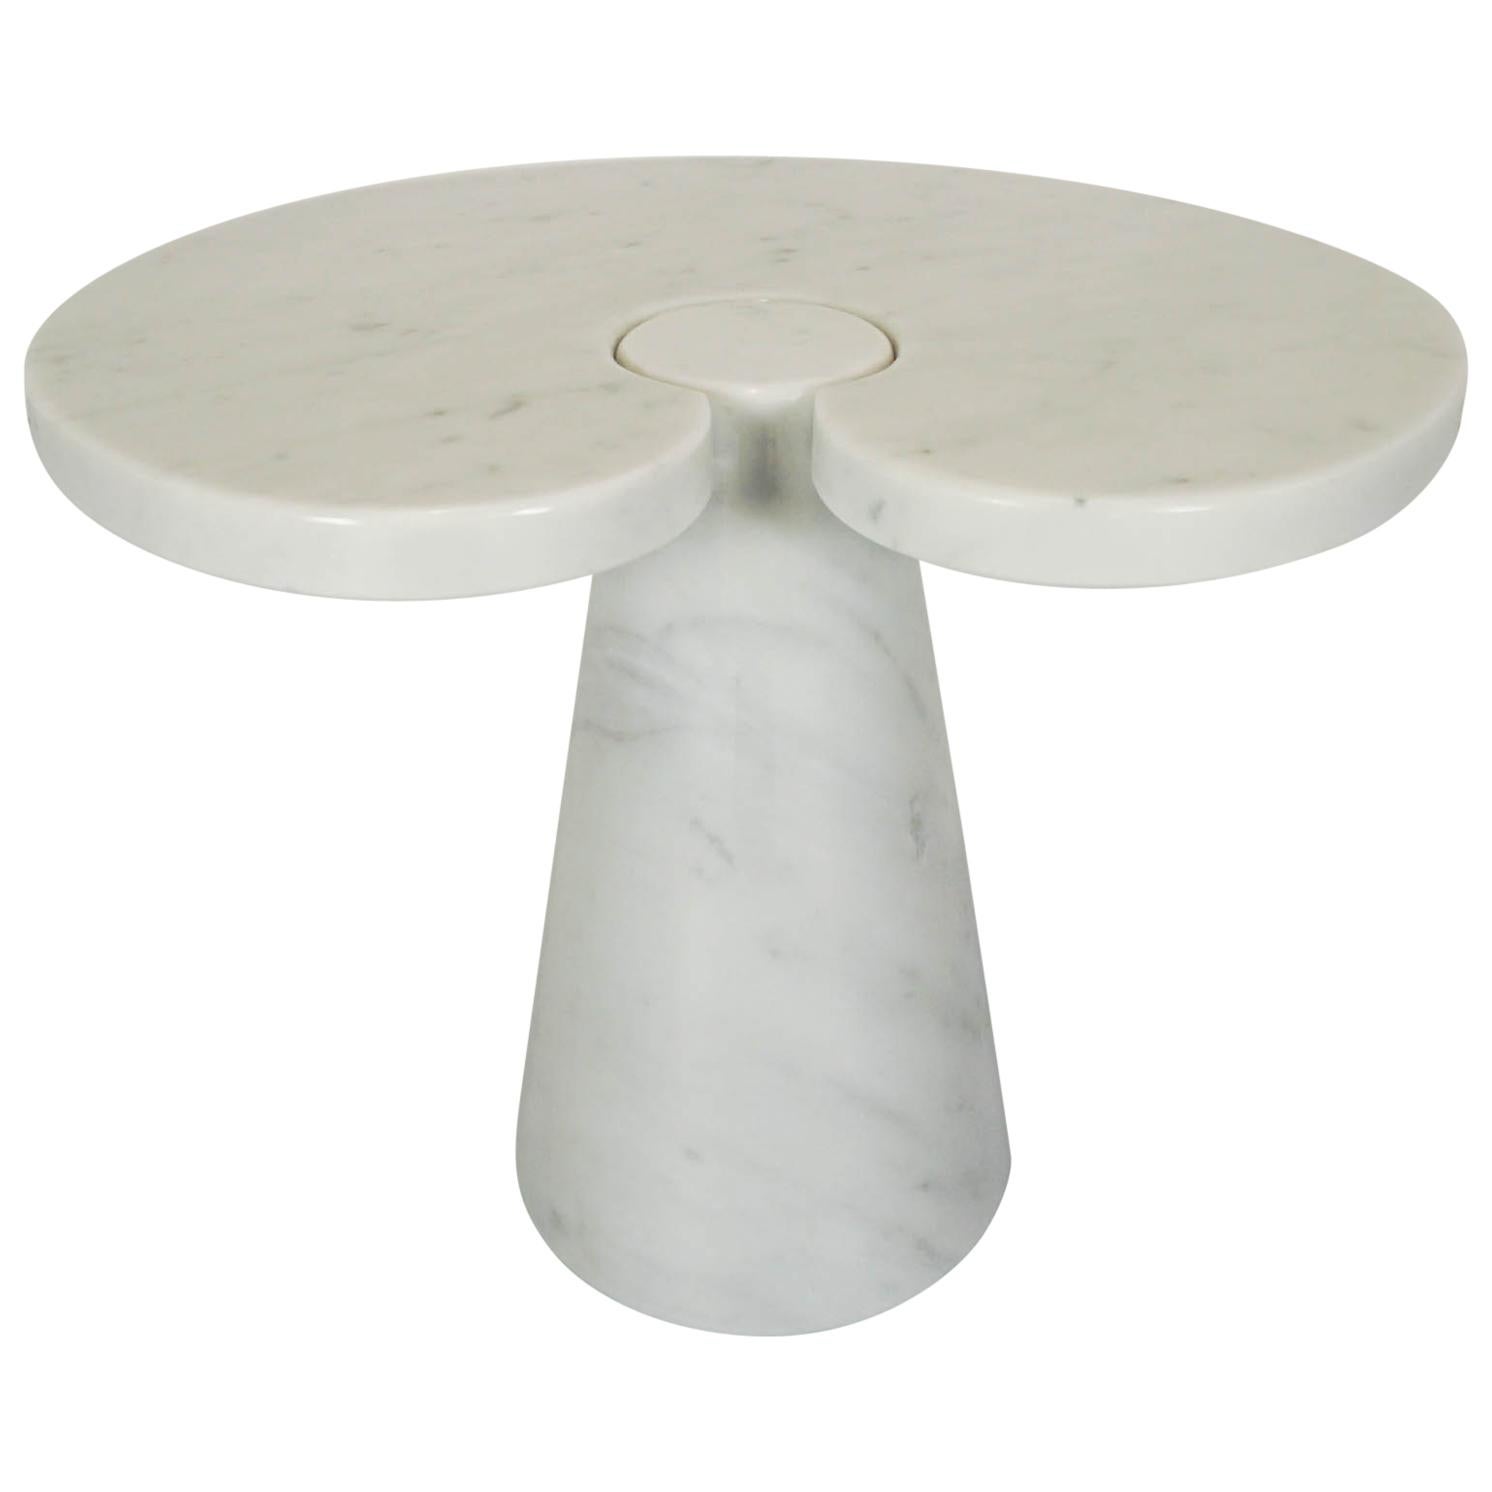 Angelo Mangiarotti for Skipper Low Side Table Mod. Eros